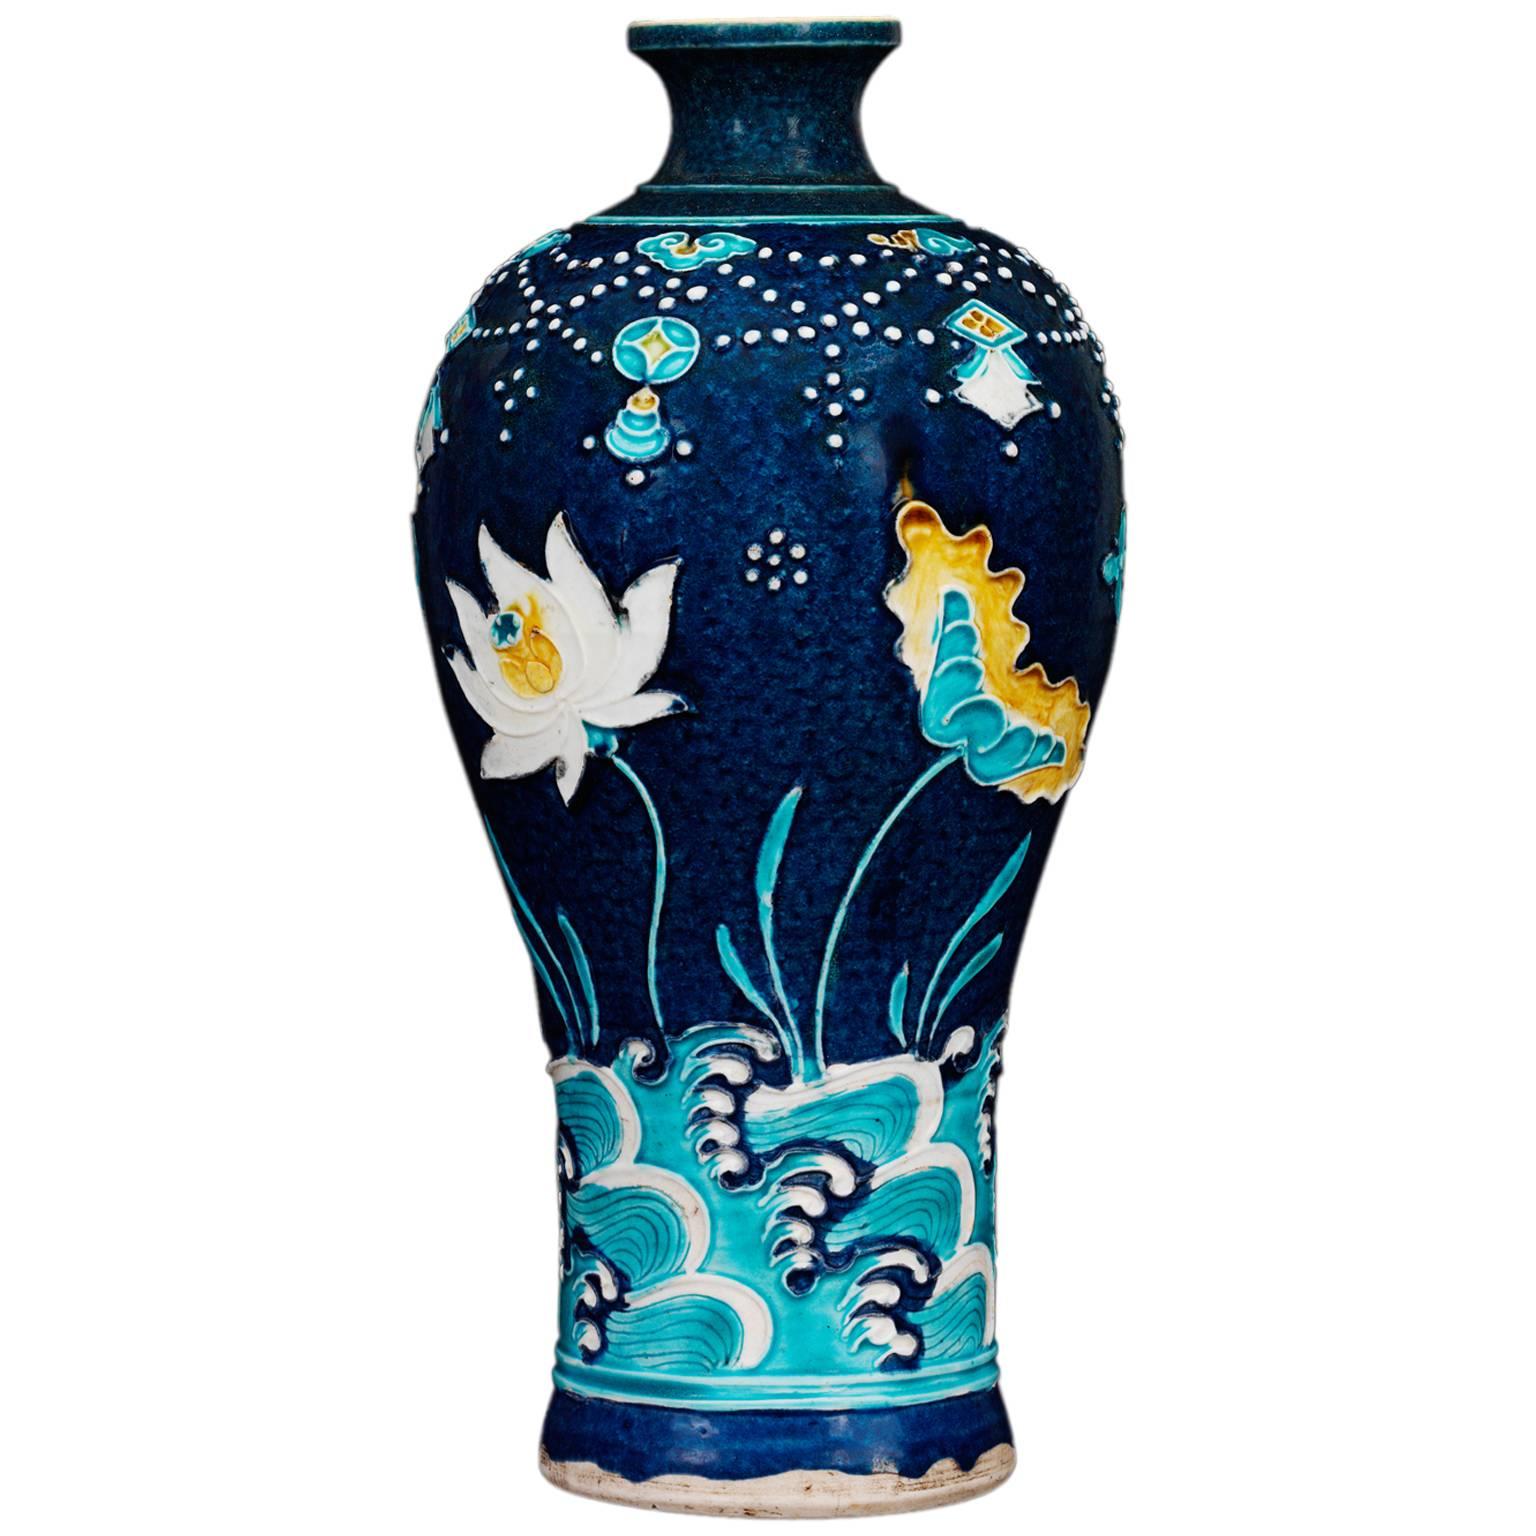 15th-16th Century, Ming Dynasty, Fahua Meiping For Sale